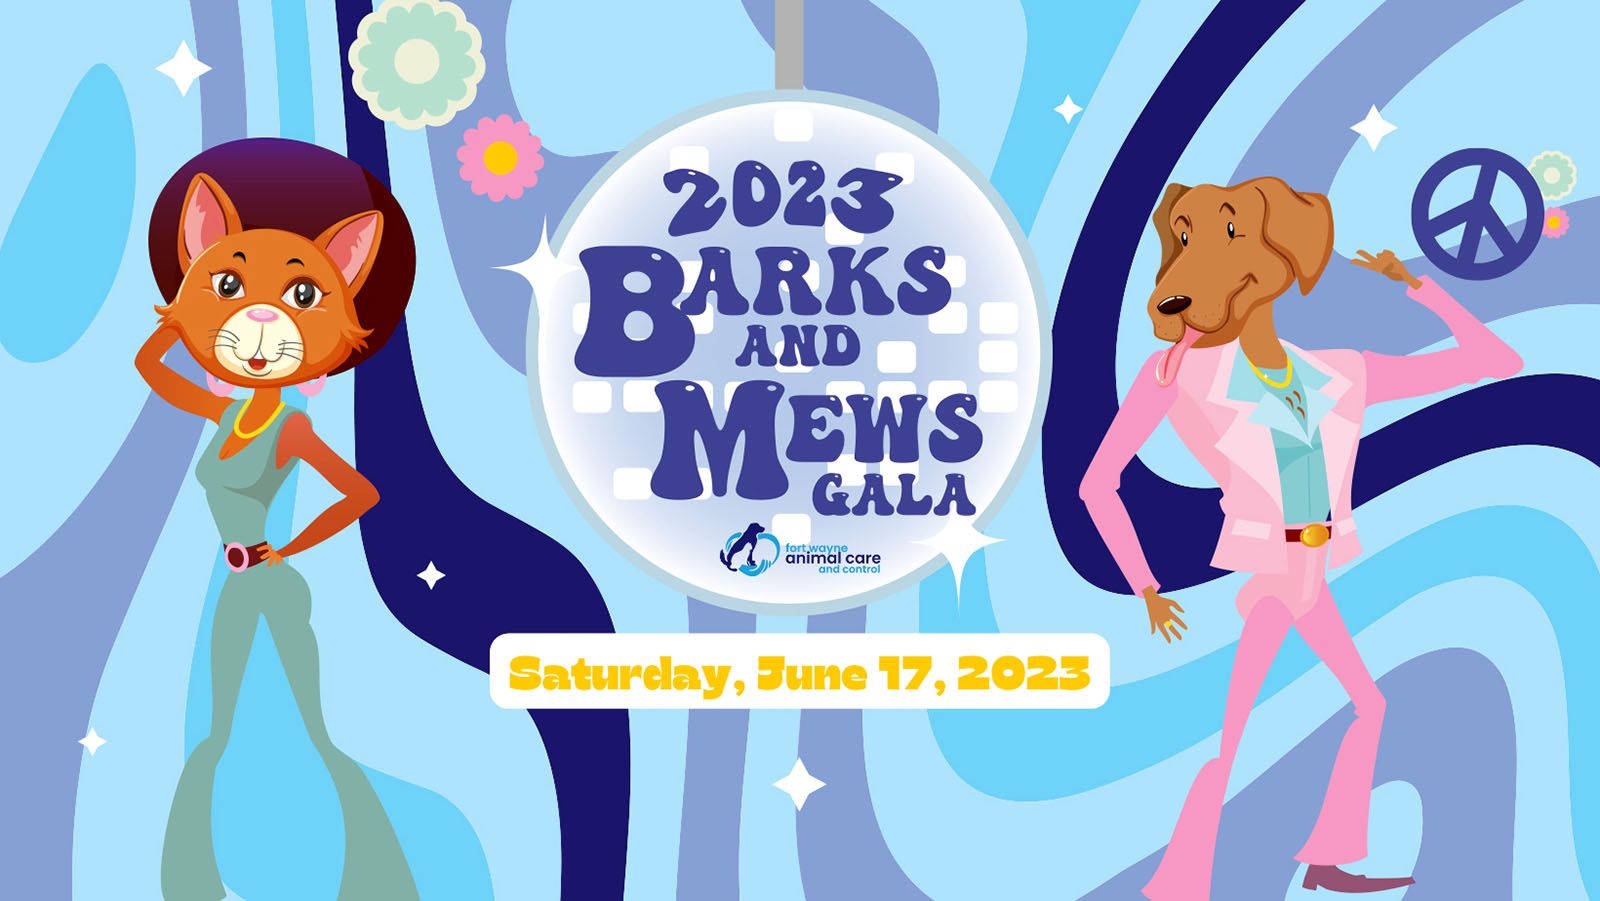 Fort Wayne Animal Care & Control's Barks & Mews Gala will be June 17.